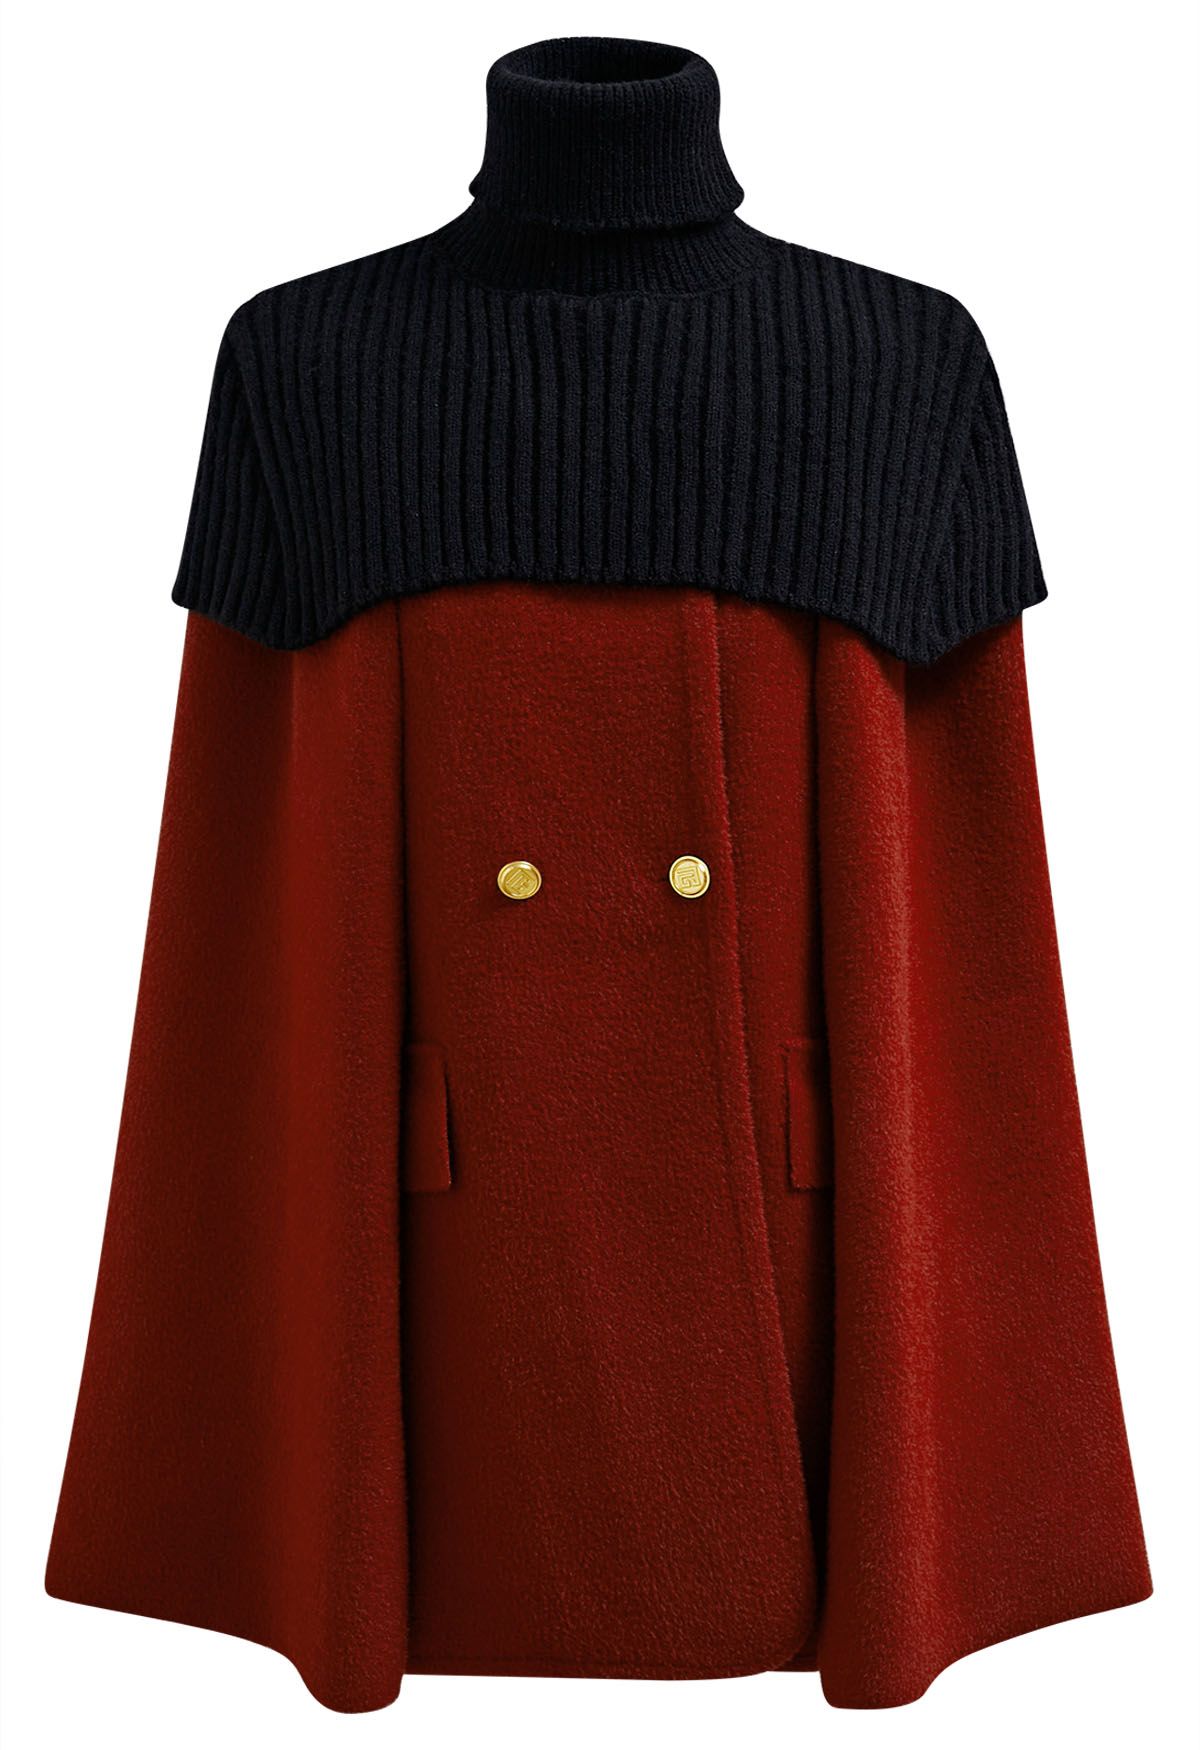 Turtleneck Double-Breasted Twinset Cape Coat in Red